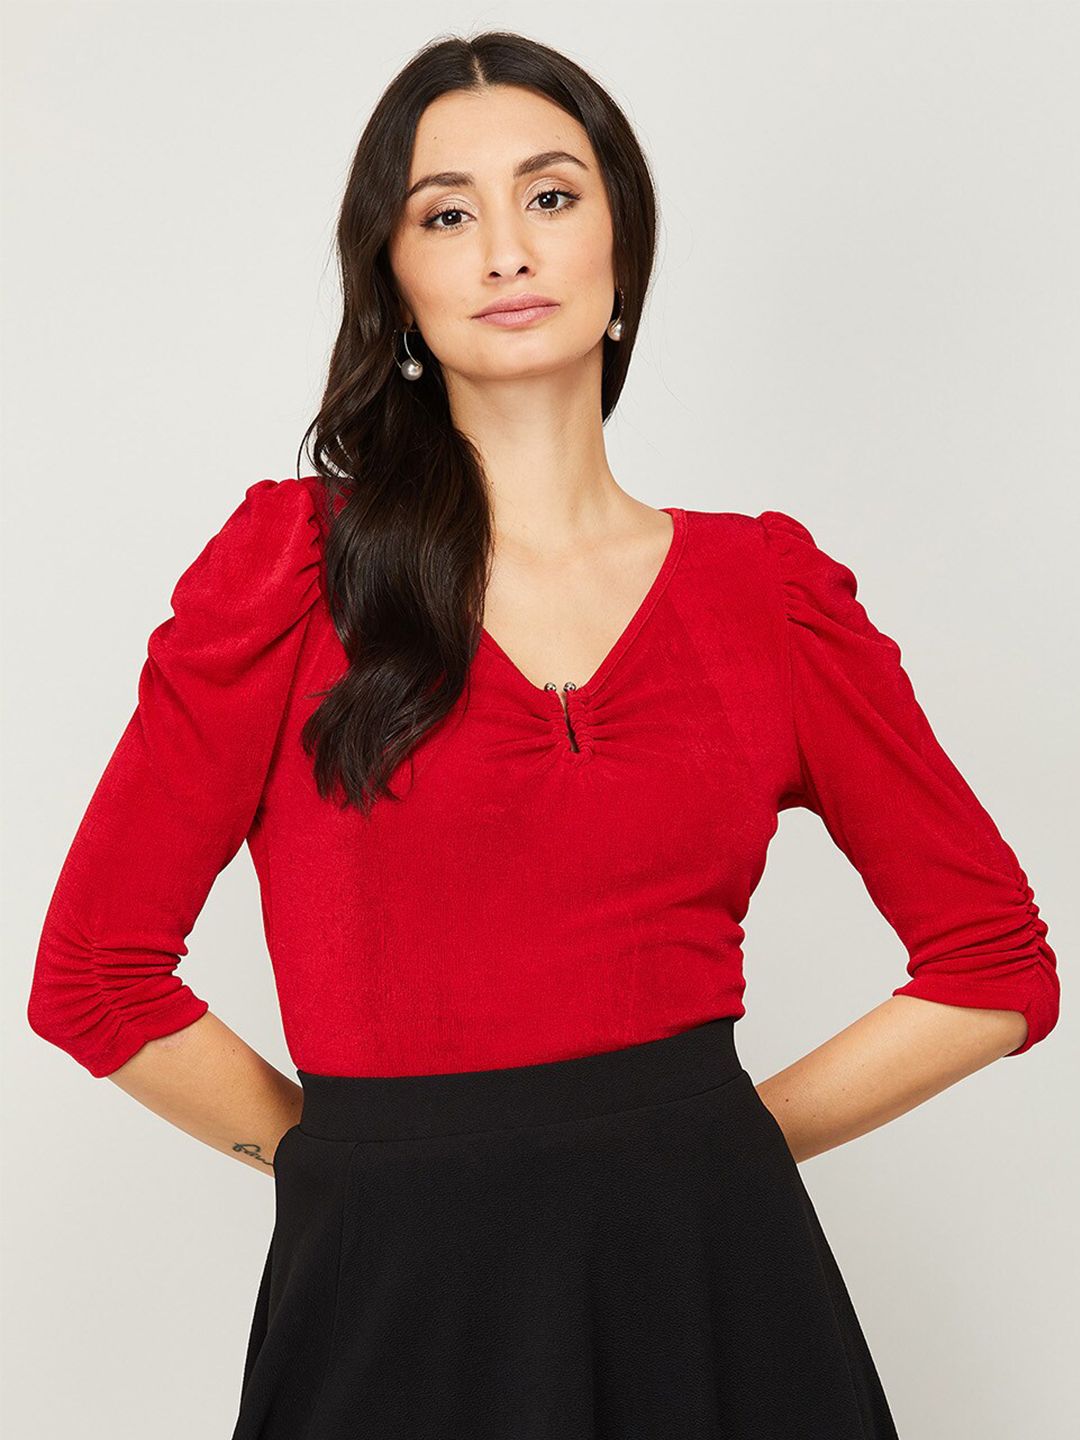 CODE by Lifestyle Red Top Price in India